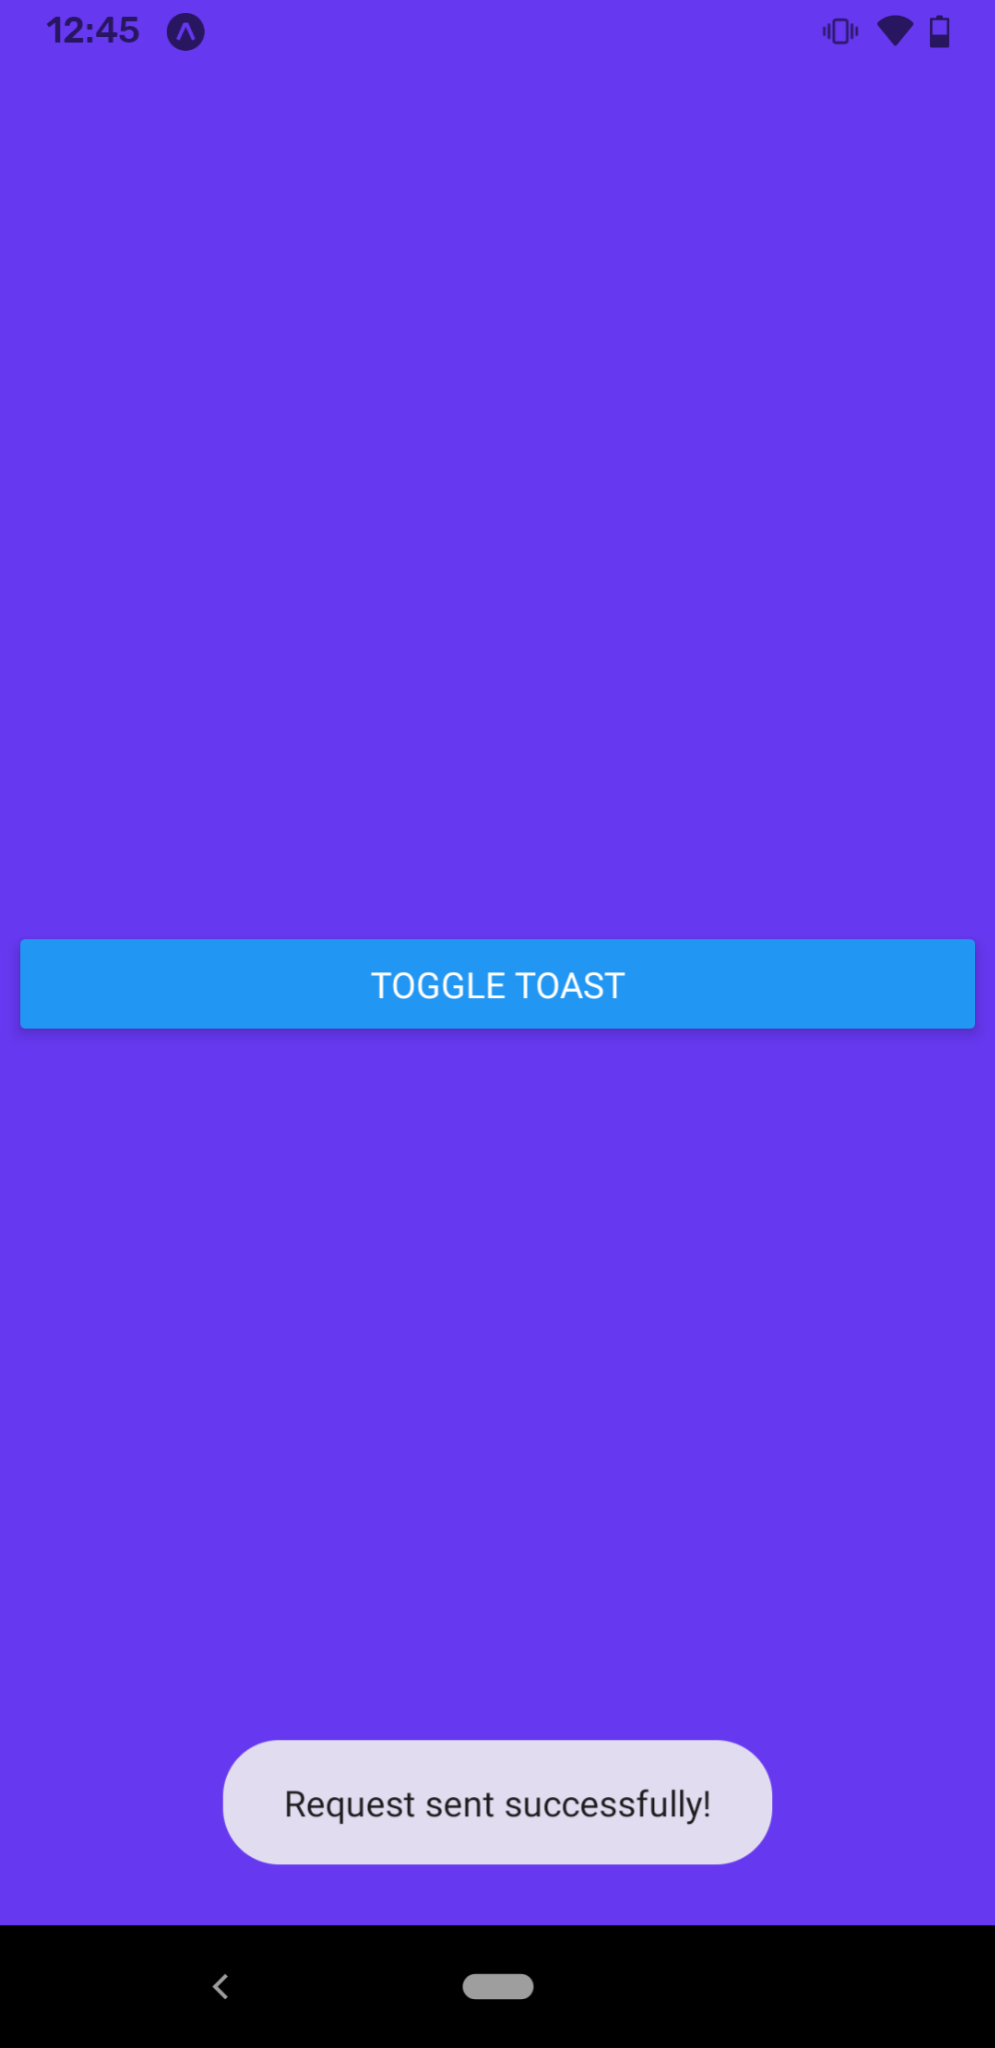 Pixel 3a showing toast message in an app